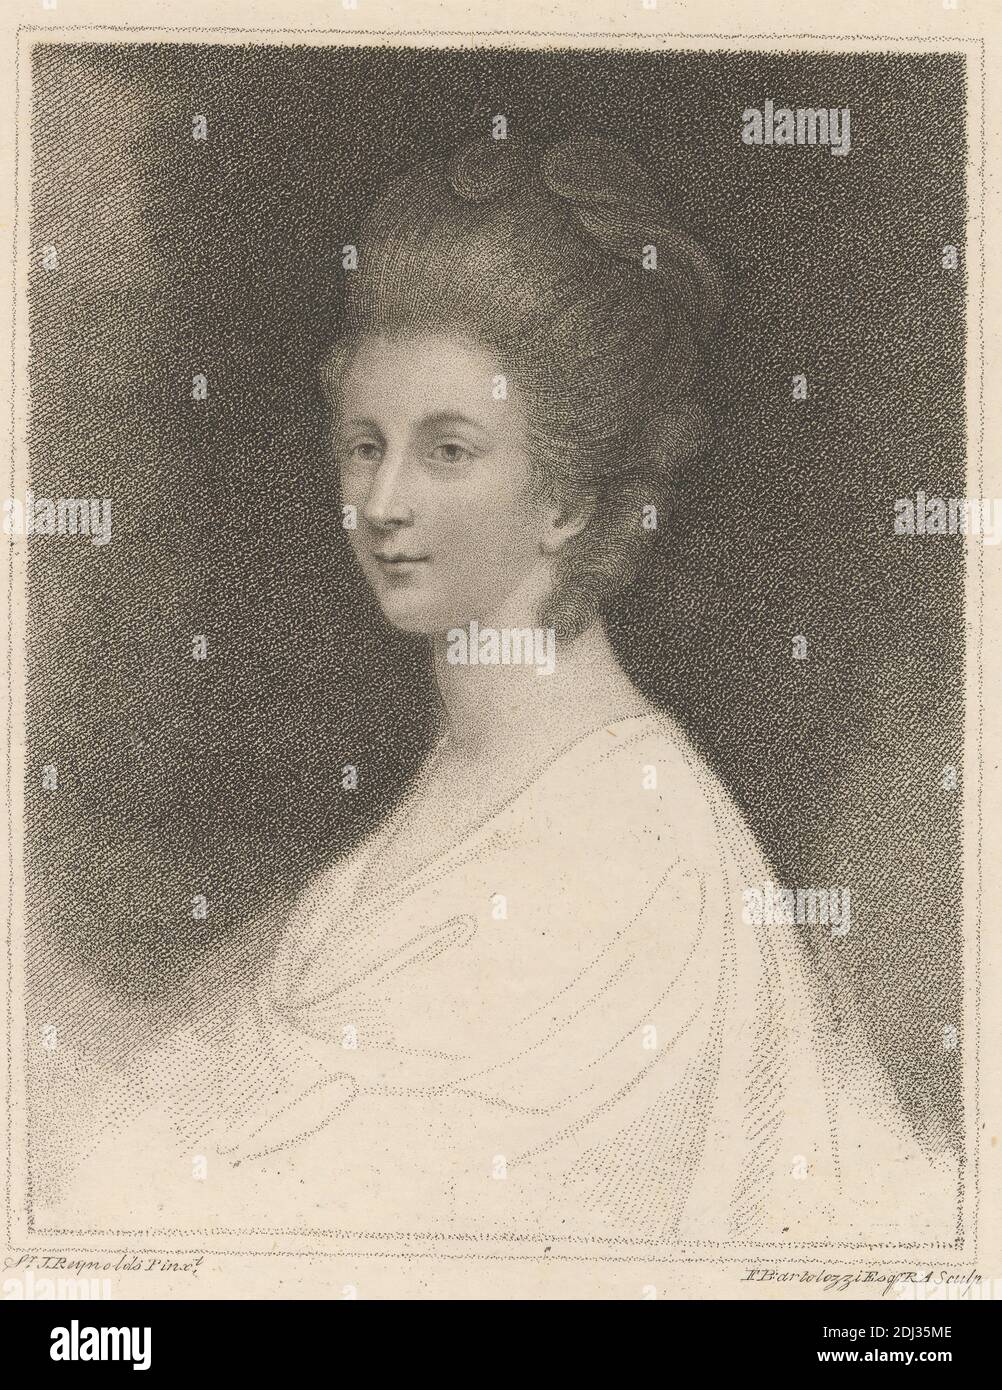 Mrs. Lenox, Print made by Francesco Bartolozzi RA, 1728–1815, Italian, active in Britain (1764–99), after Sir Joshua Reynolds RA, 1723–1792, British, Published by Edward Harding, 1755–1840, British, 1792, Etching and stipple engraving on medium, slightly textured, cream wove paper, Sheet: 7 1/2 x 5 7/16 inches (19 x 13.8 cm) and Image: 4 15/16 x 3 7/8 inches (12.5 x 9.9 cm), author, book, costume, curls, illustration, novel, novelist, portrait, woman, writer Stock Photo